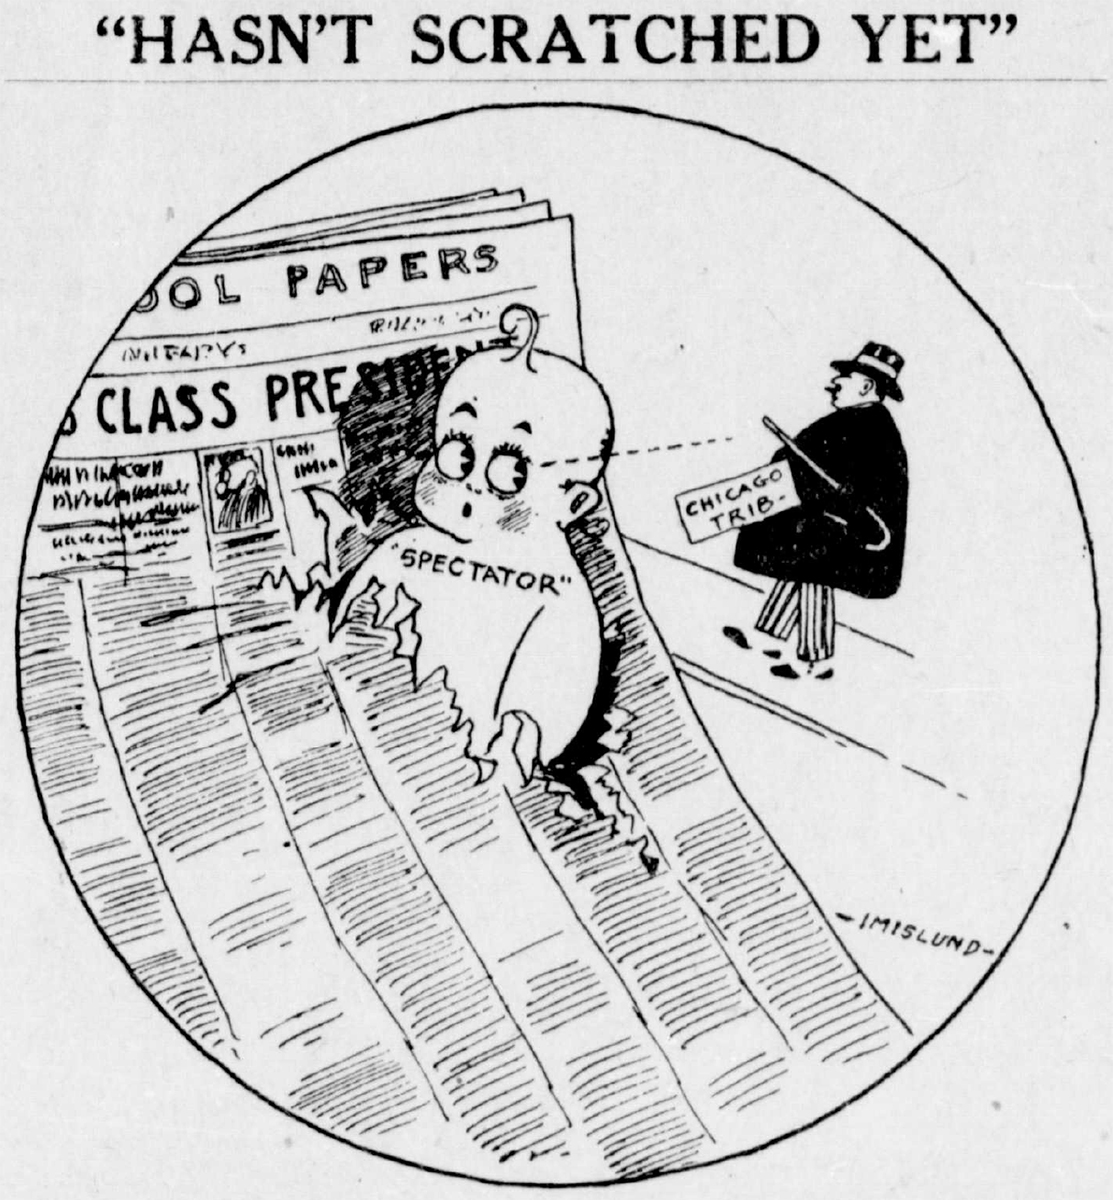 A comic drawn by Editor Clarence “Stub” Imislund that appeared on the front page of the first issue of The Spectator. (Photo used with permission from UW-Eau Claire Special Archives)